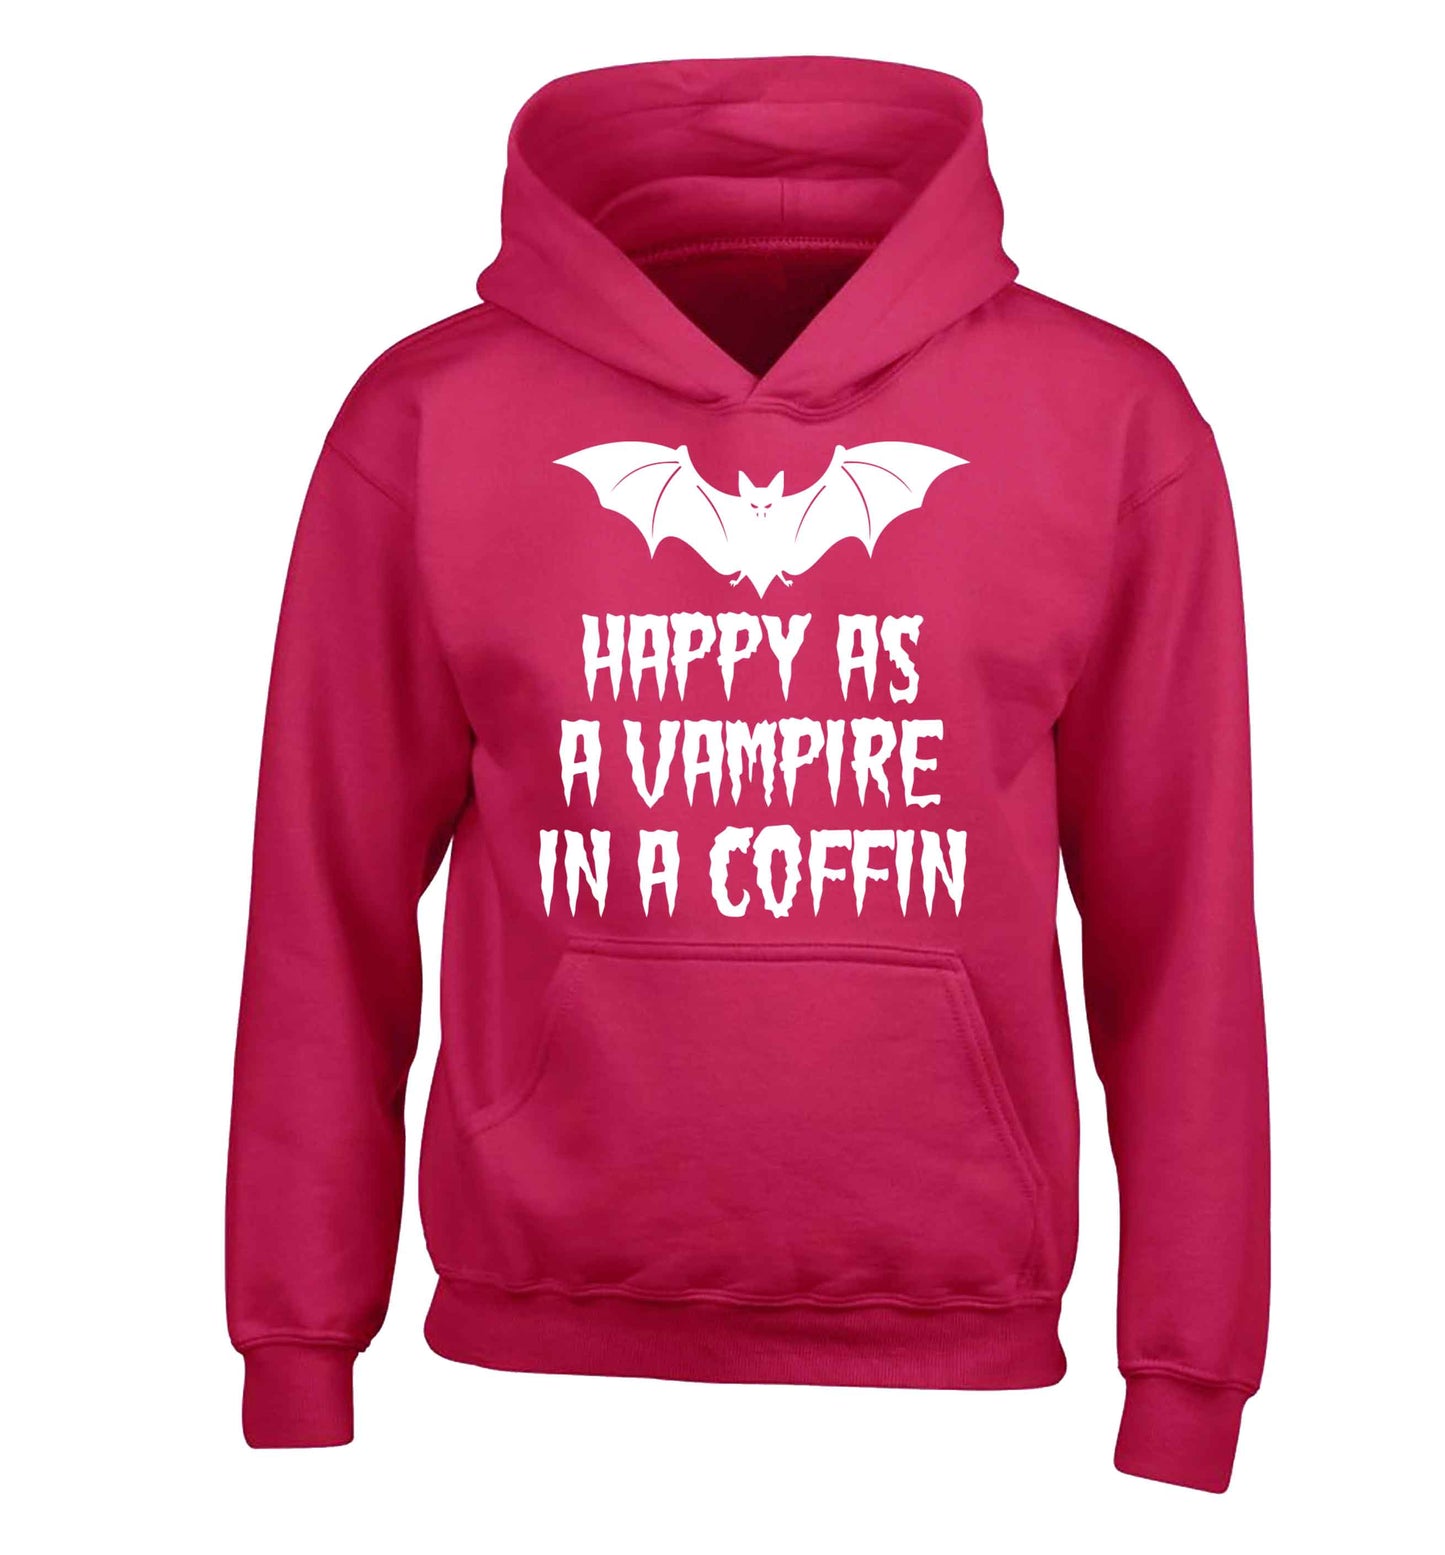 Happy as a vampire in a coffin children's pink hoodie 12-13 Years